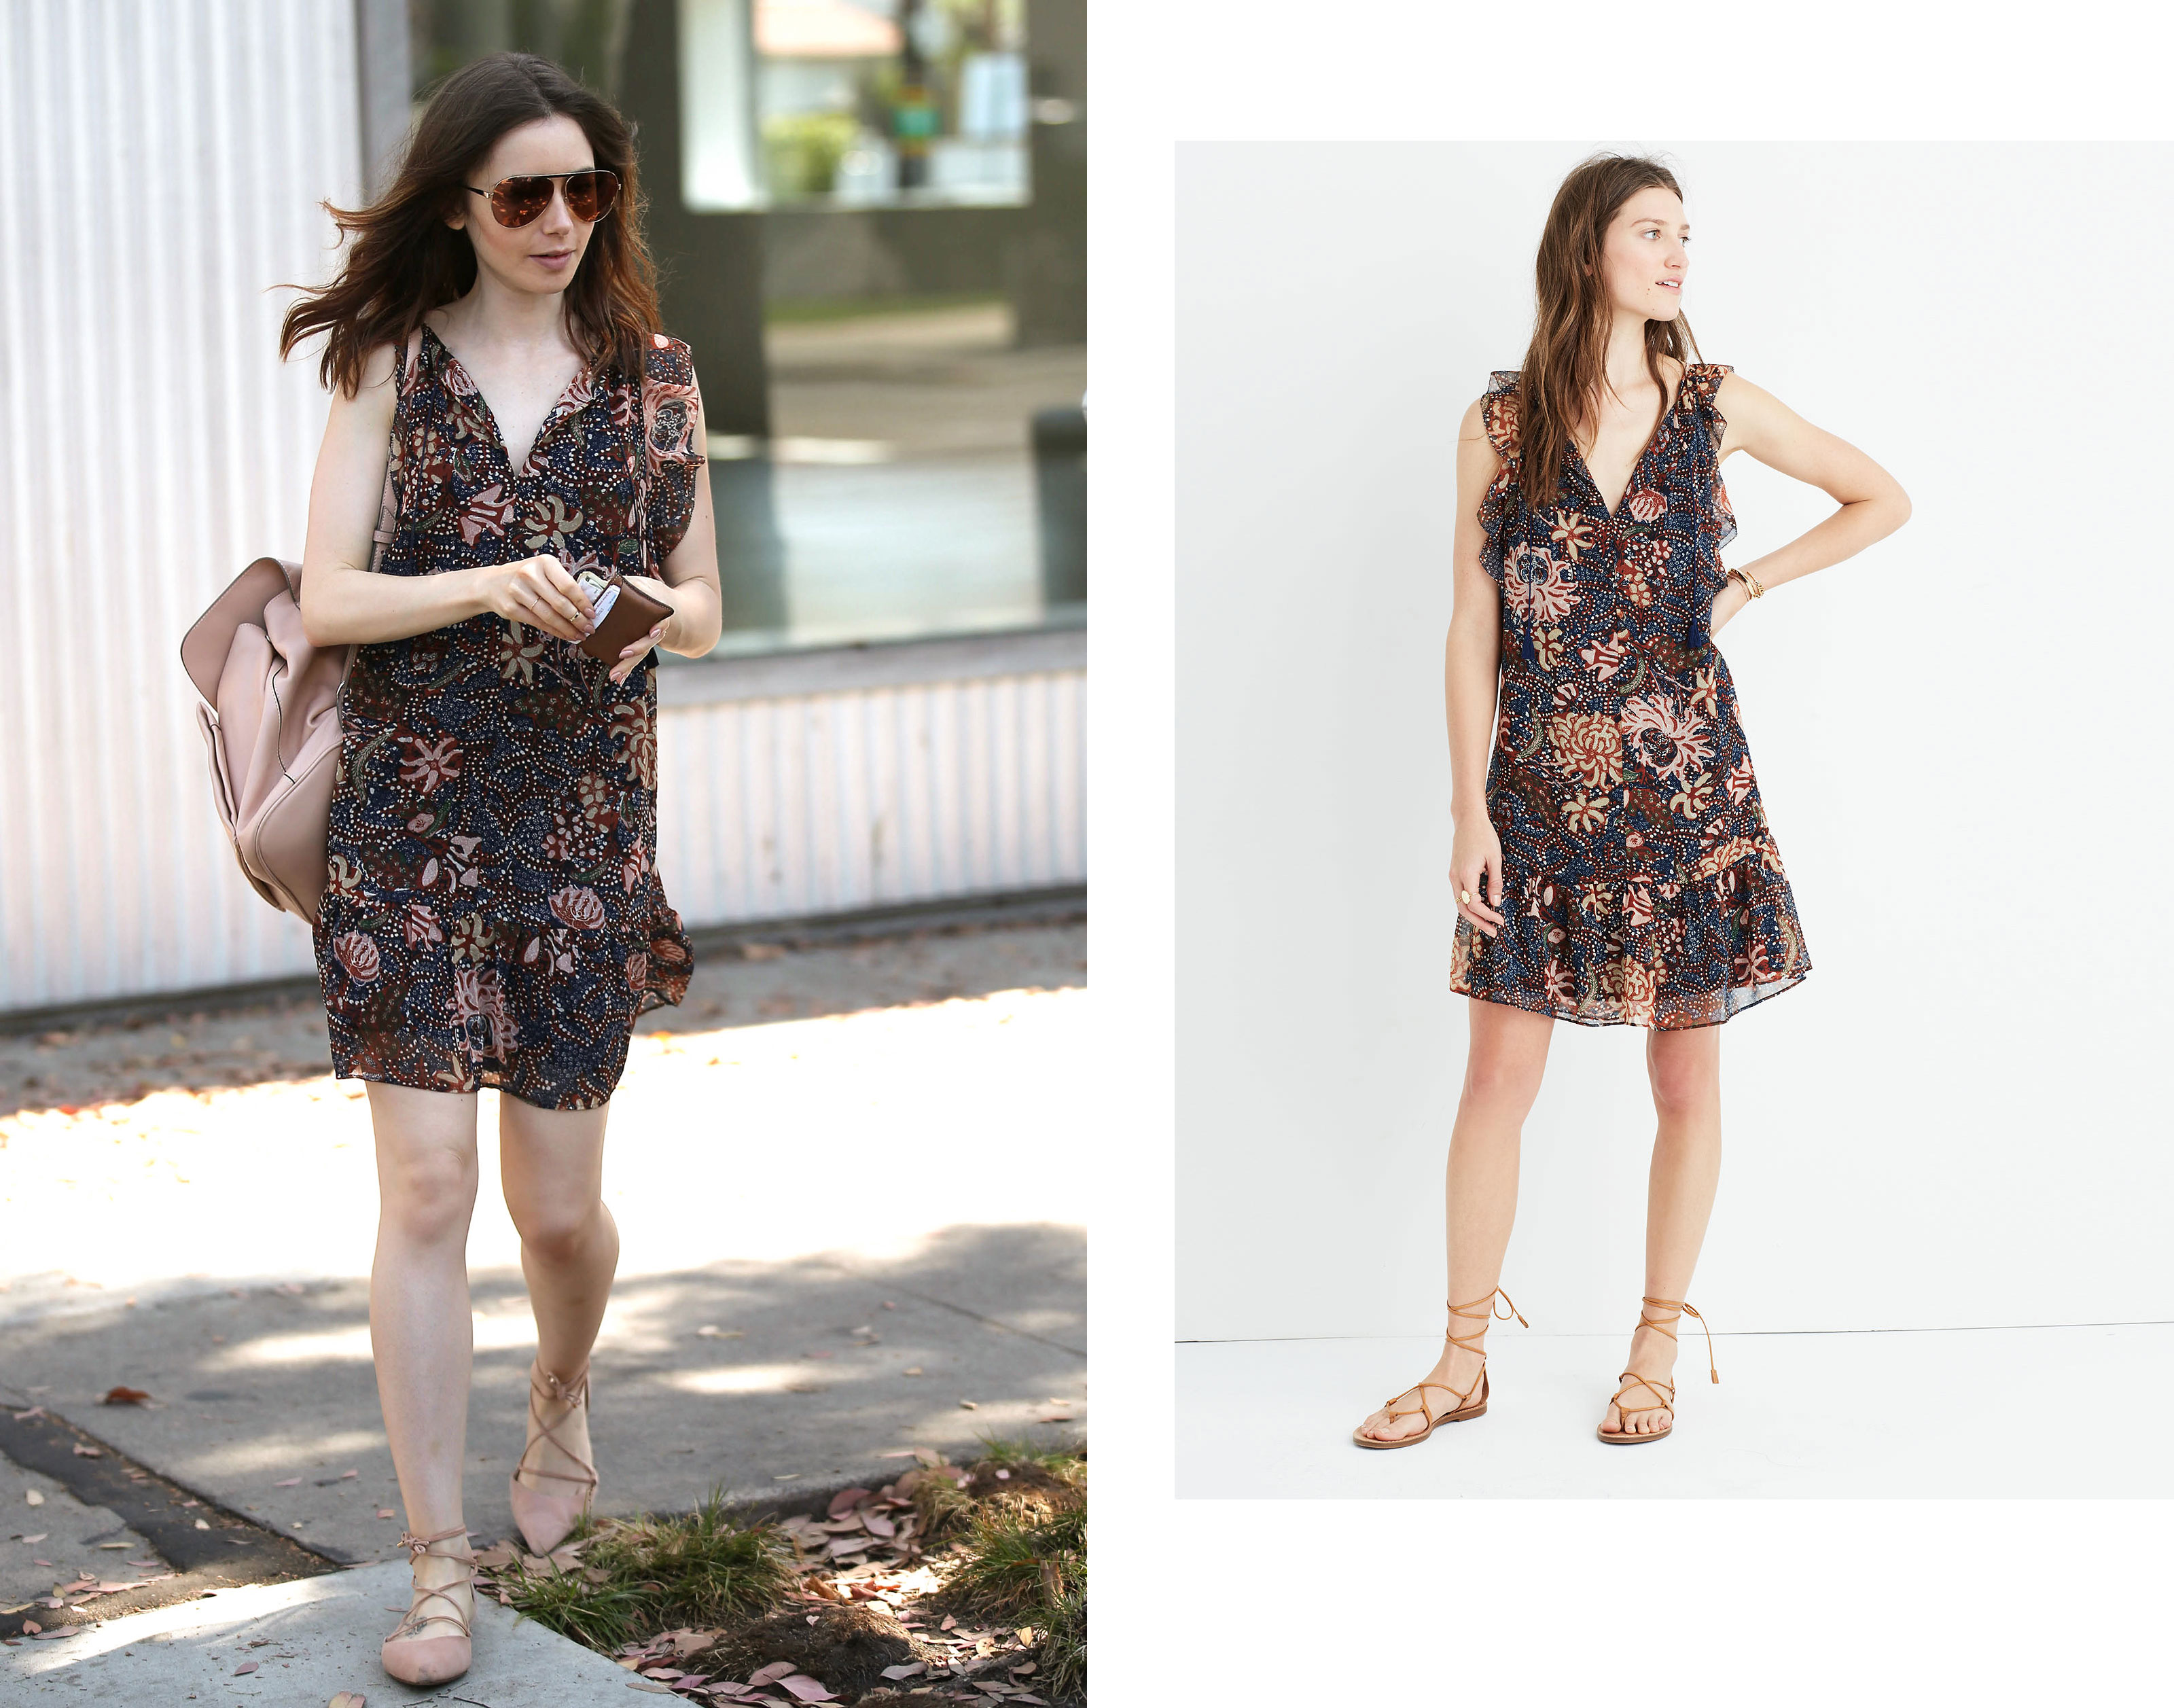 Lily Collins wears the cutest Madewell floral dress (under $100) with blush nude accessories.